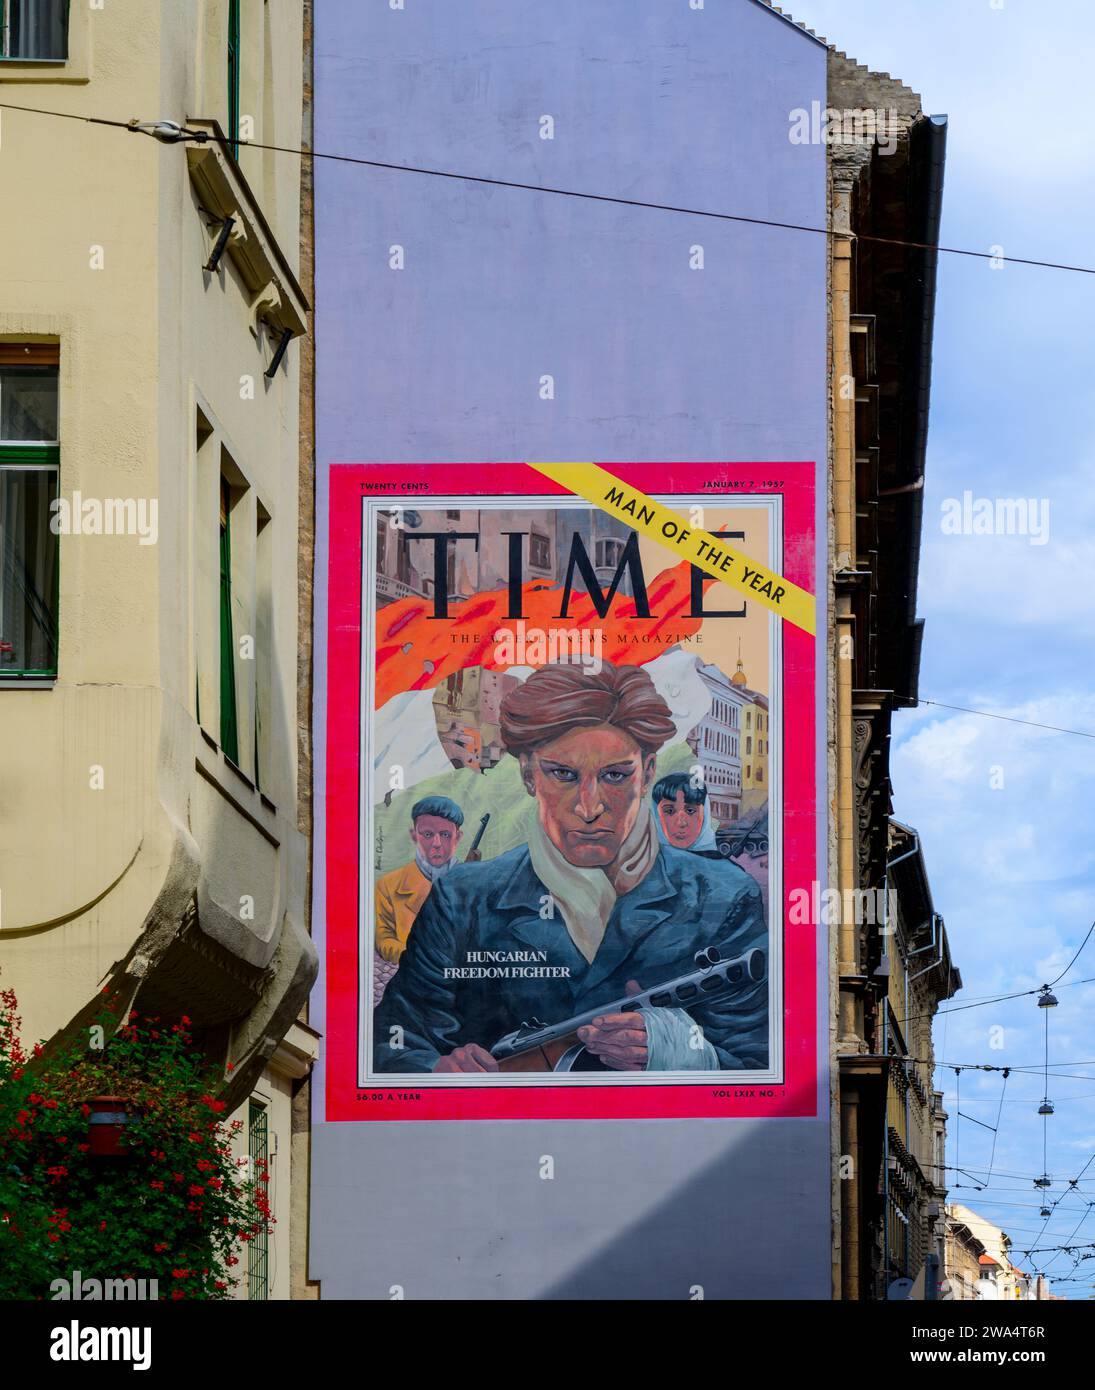 Hungarian Freedom Fighters on Time Magazine Cover January 7 1957 Graffiti on a building's wall in Wesselenyi utca, Budapest, Hungary Stock Photo